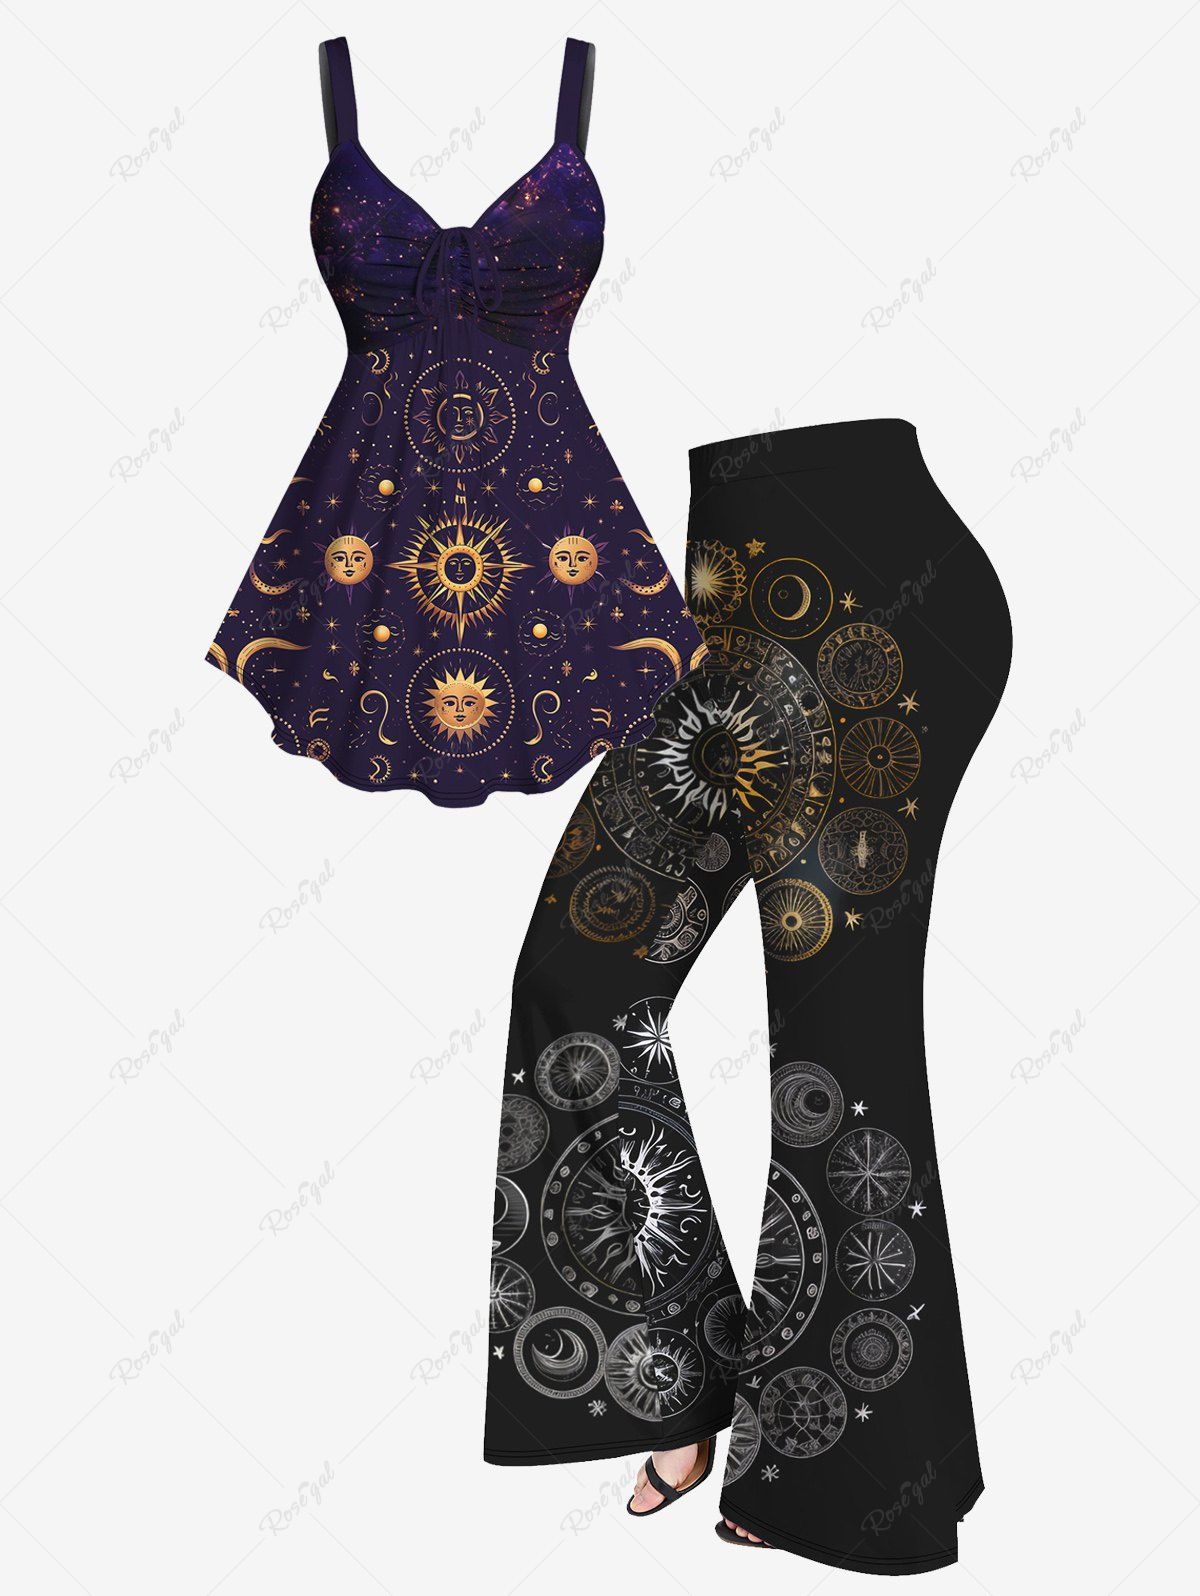 Fancy Sun Moon Star Galaxy Print Cinched Tank Top And 3D Sun Moon Star Glitter Print Flare Pants Gothic Outfit  